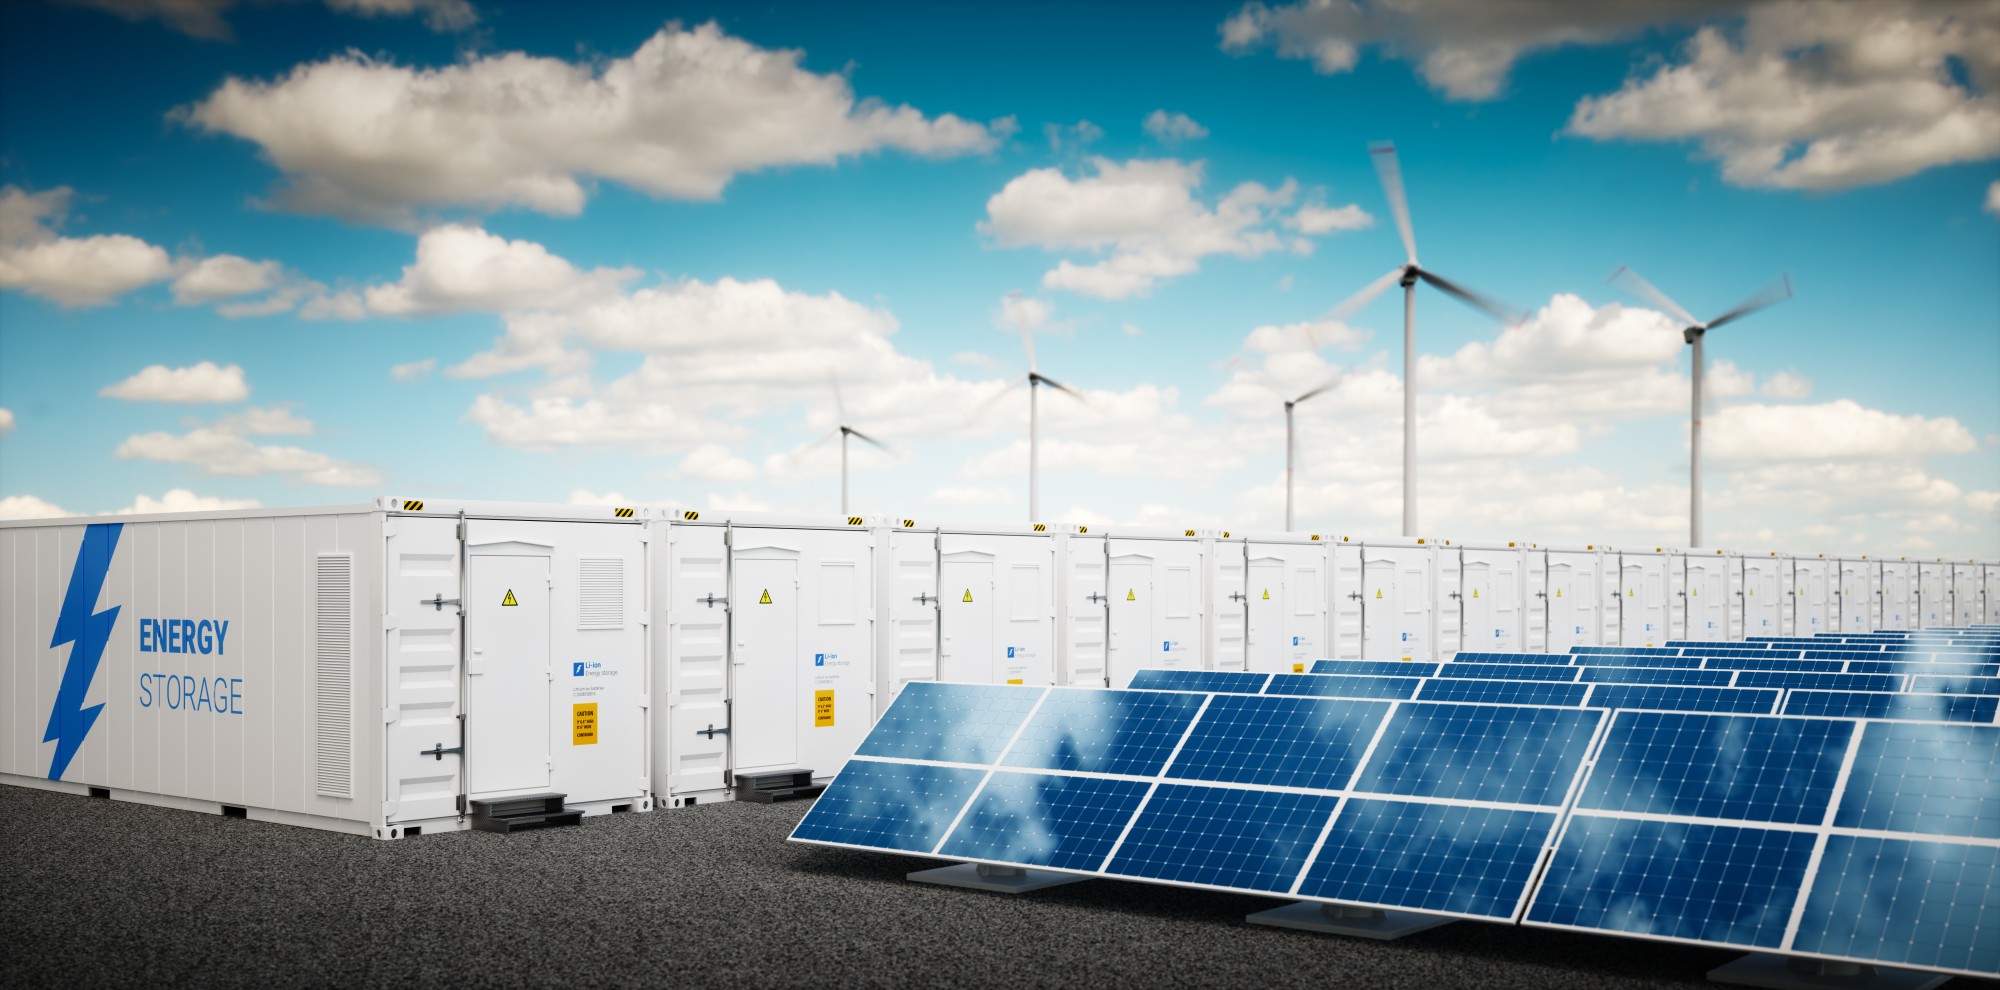 Apple Expands Renewable Energy by 30% Across Supply Chain